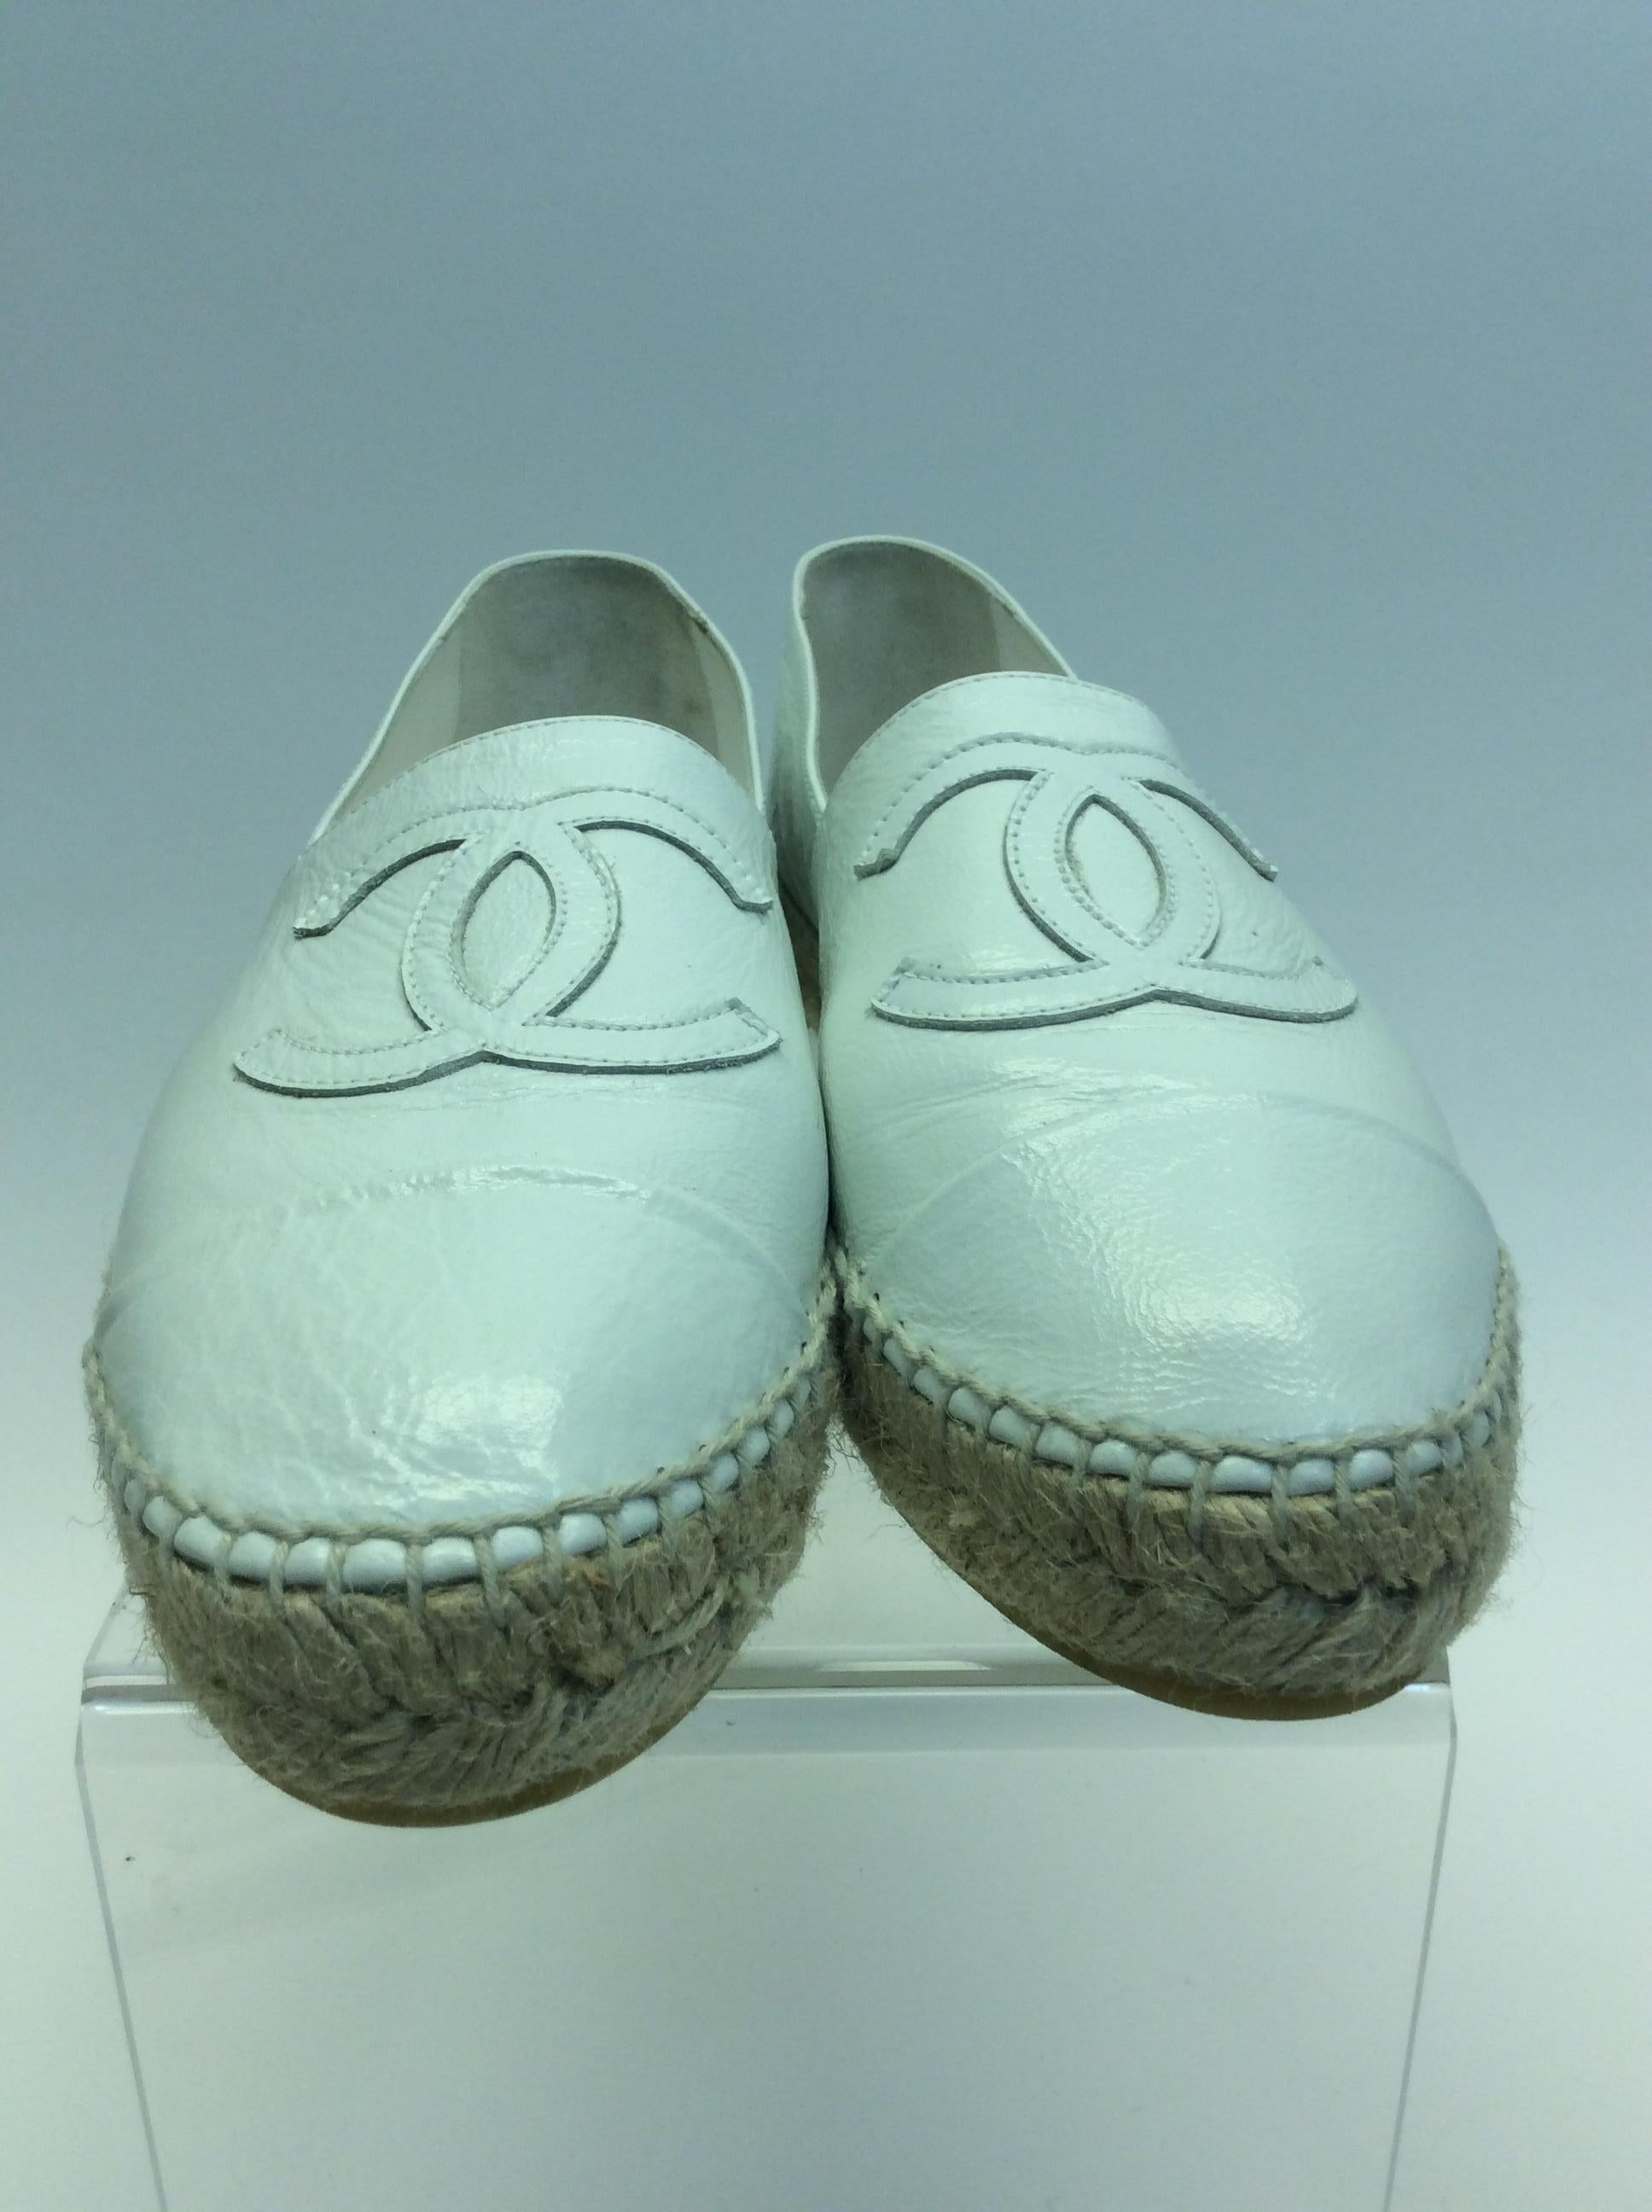 Chanel White Leather Espadrilles
$575
Made in Spain
Leather
Size 39
